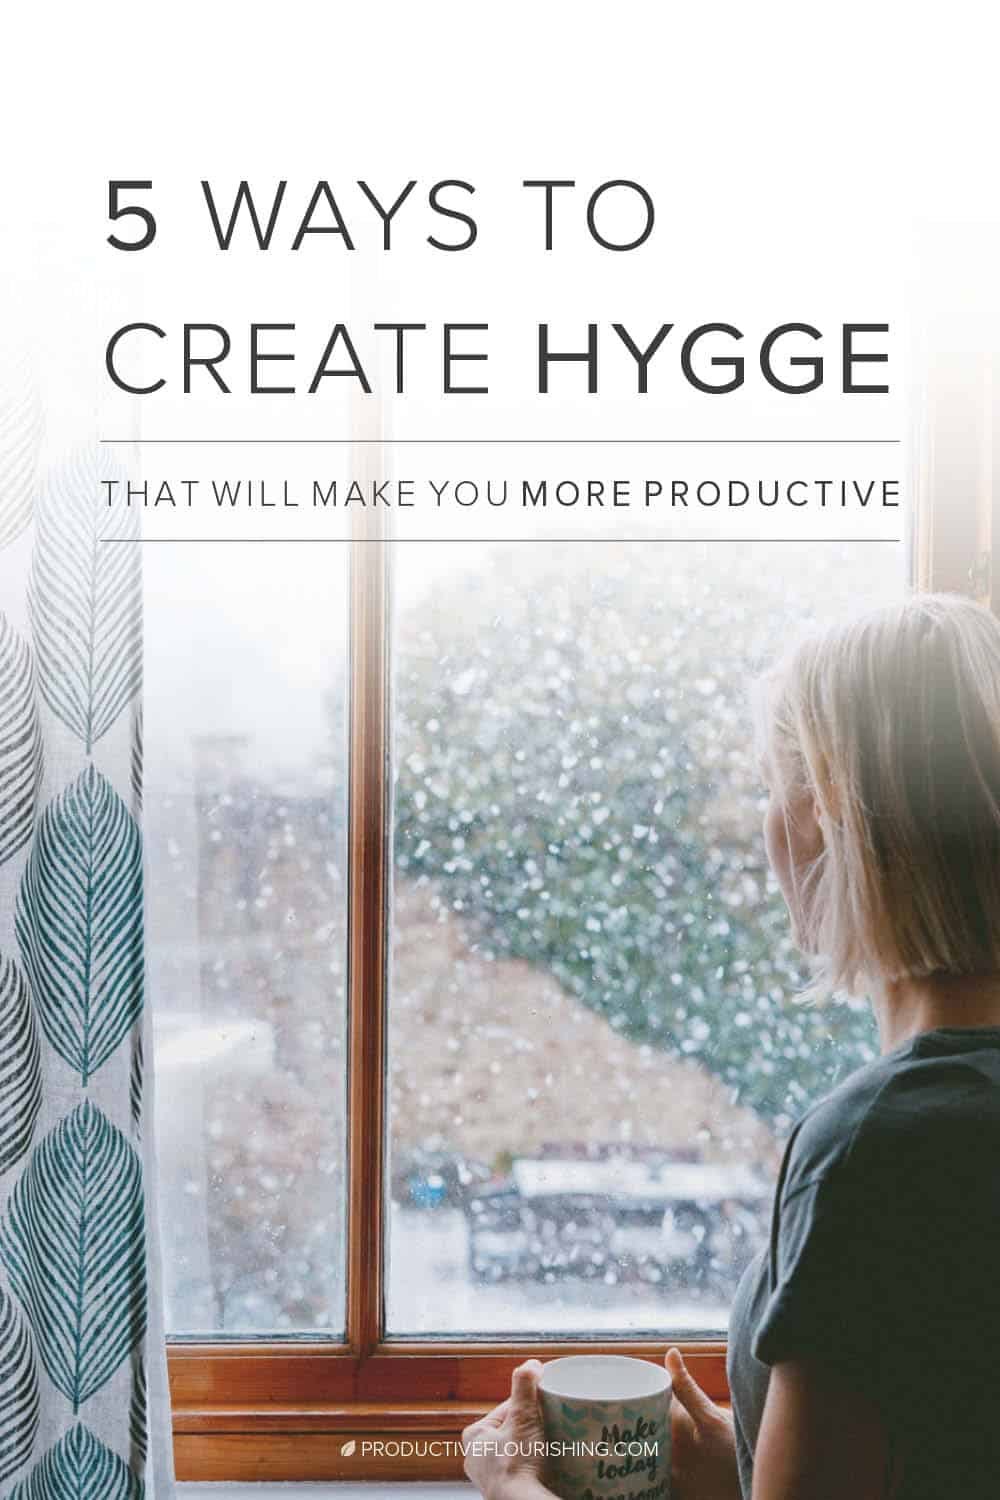 How can you be comfortable and get stuff done? How can you feel warm and cozy when you have to finish this massive coding project? There is a way to combine these concepts, to find some peace in the task. Here are 5 ways to create hygge that will make you more productive. #hygge #businessproductive #productiveflourishing